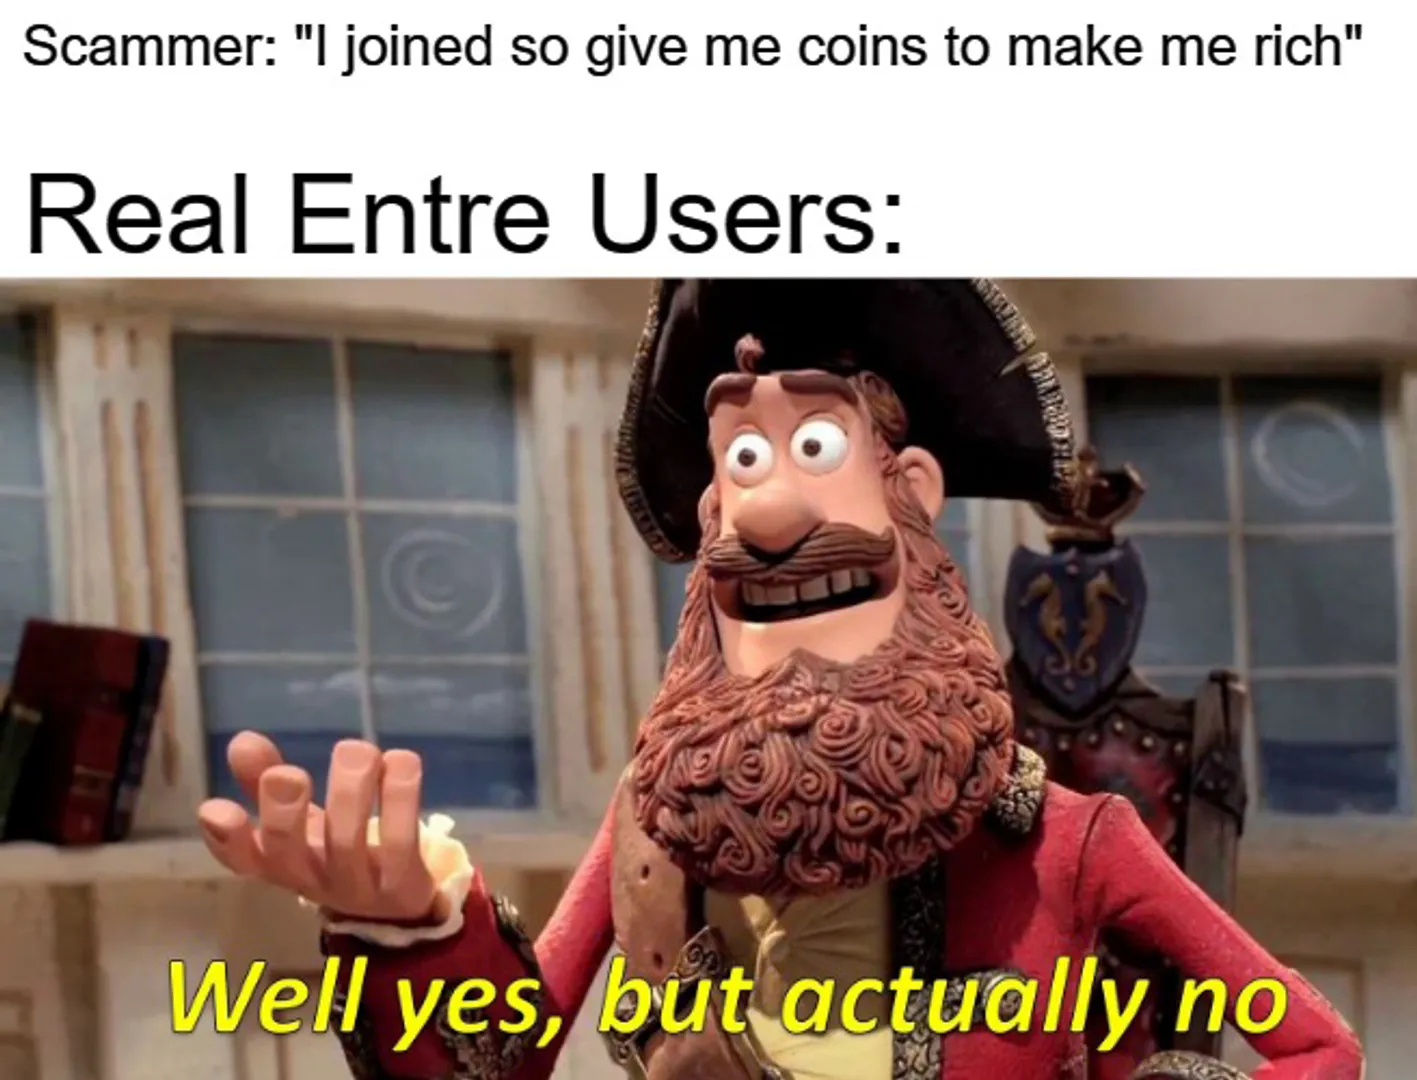  I recently got a DM where someone just asked me: 

"Hey, so I joined and I need coins. Can you send me some?" 

I thought it was funny at the moment, but I had to explain that Entre is not just a platform to make money. It's a great way to see other opportunities, build community, and connect with one another! 